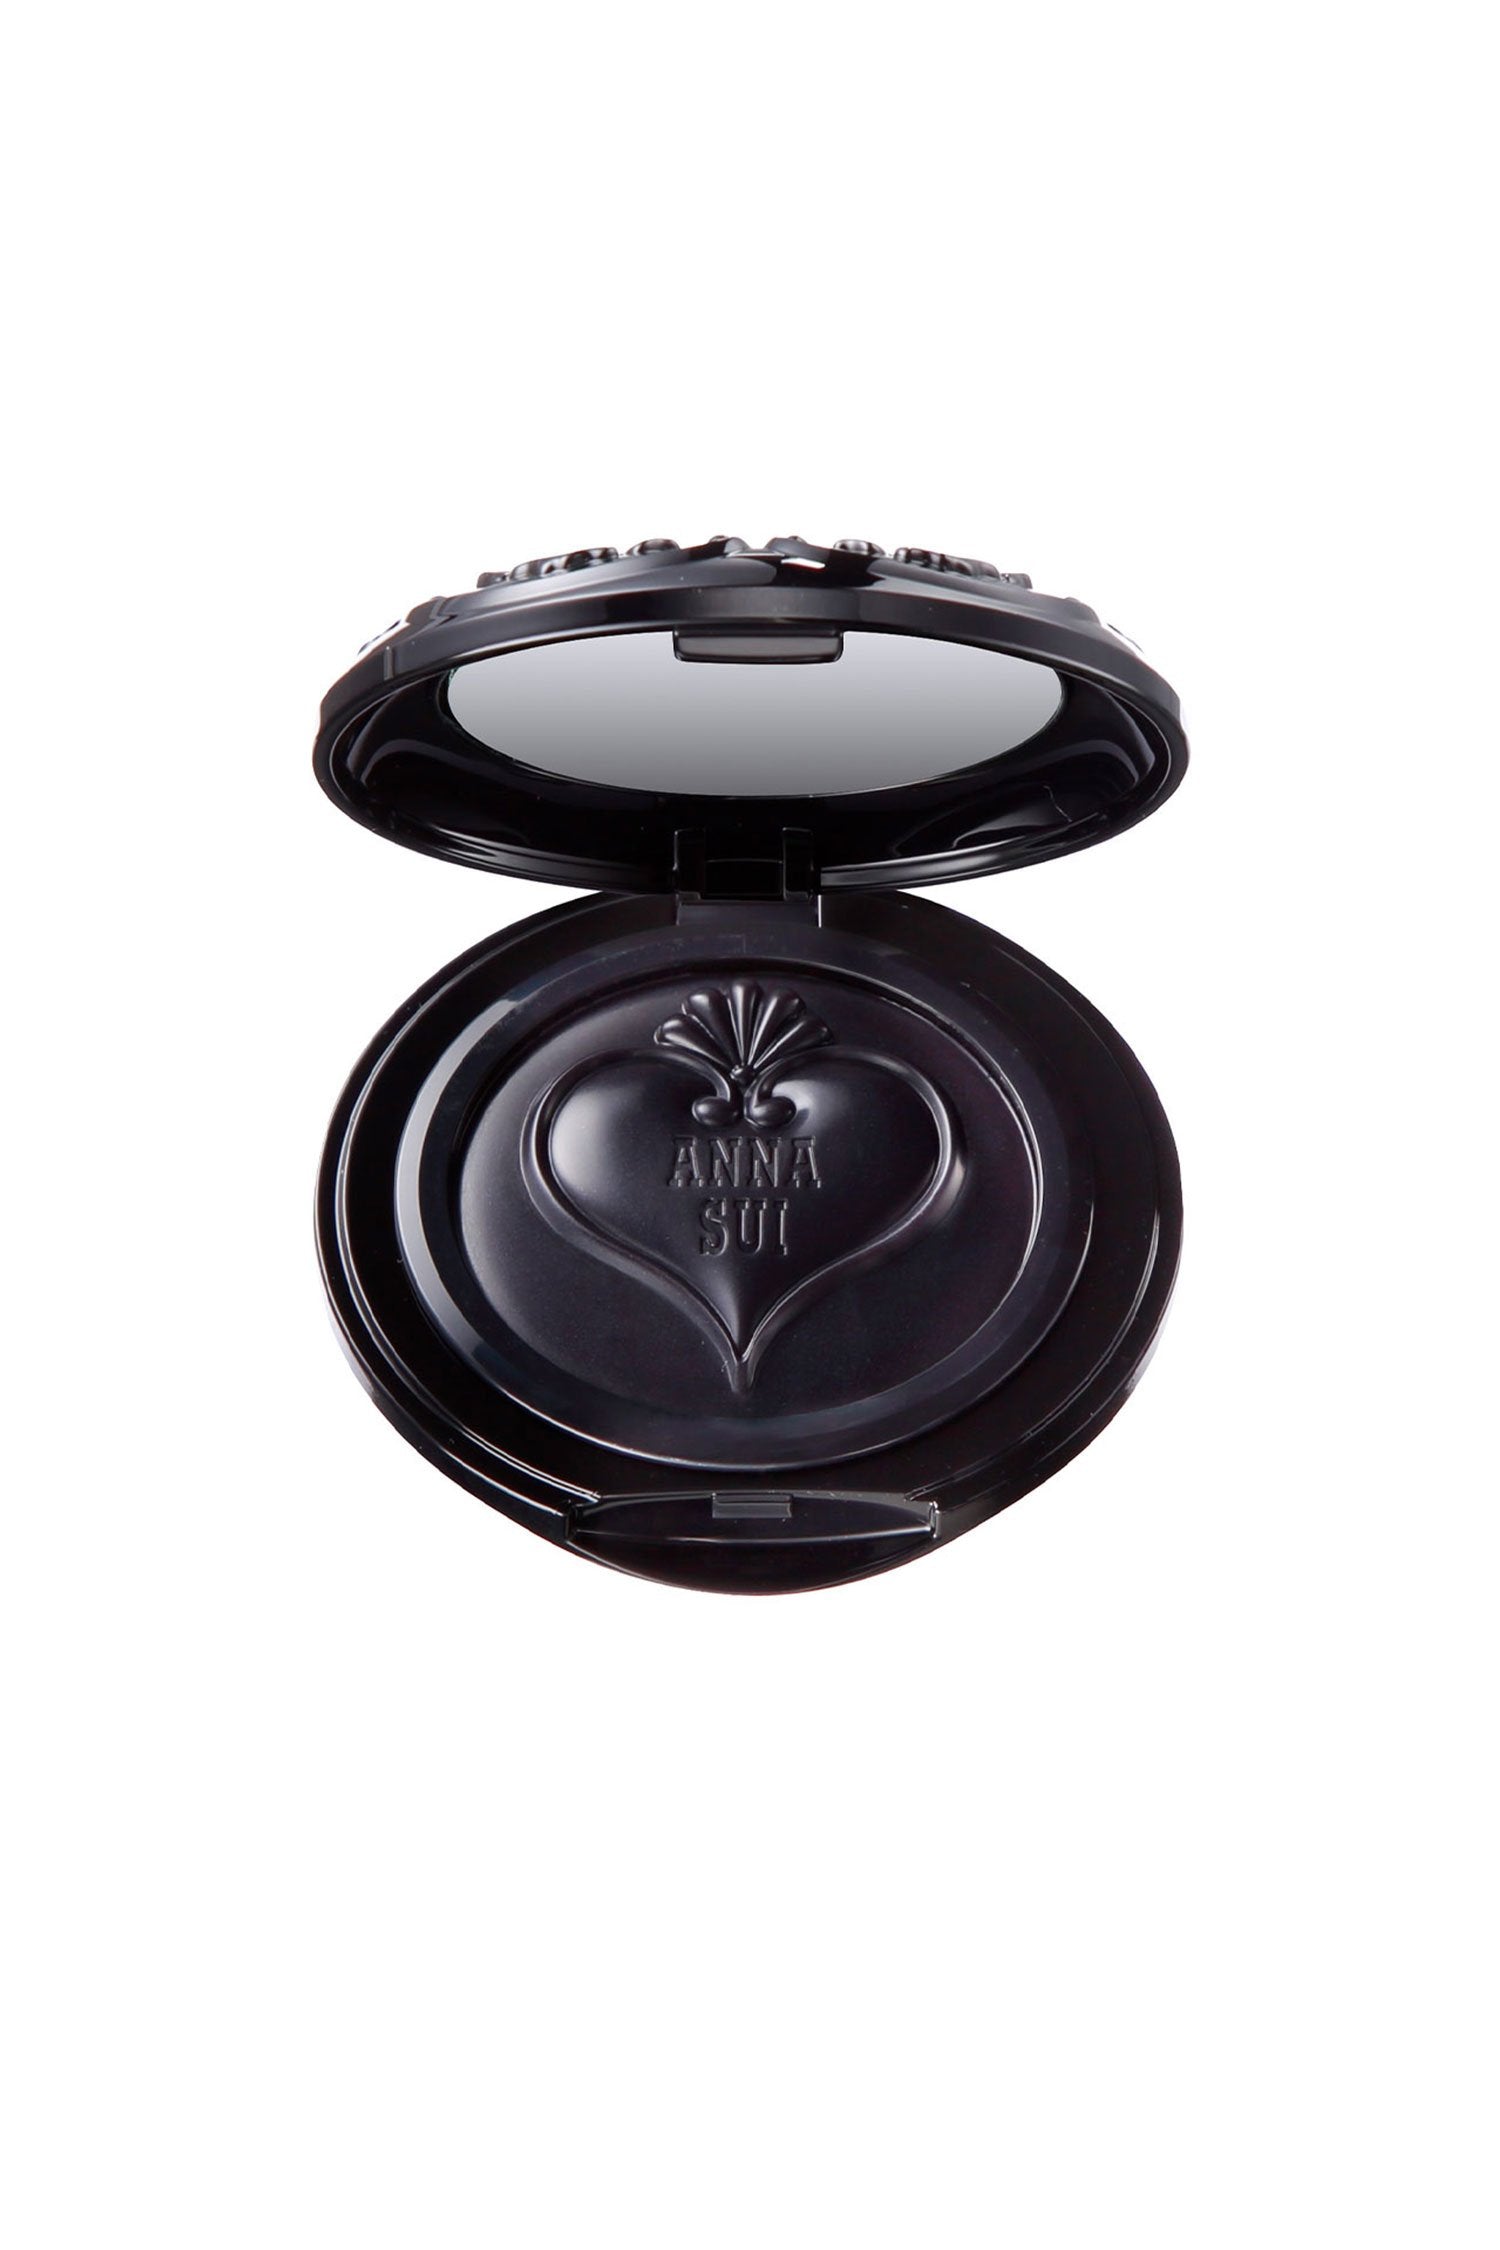 Cream blush in a round black container, mirror in the top lid, heart-shaped lid with Anna Sui label